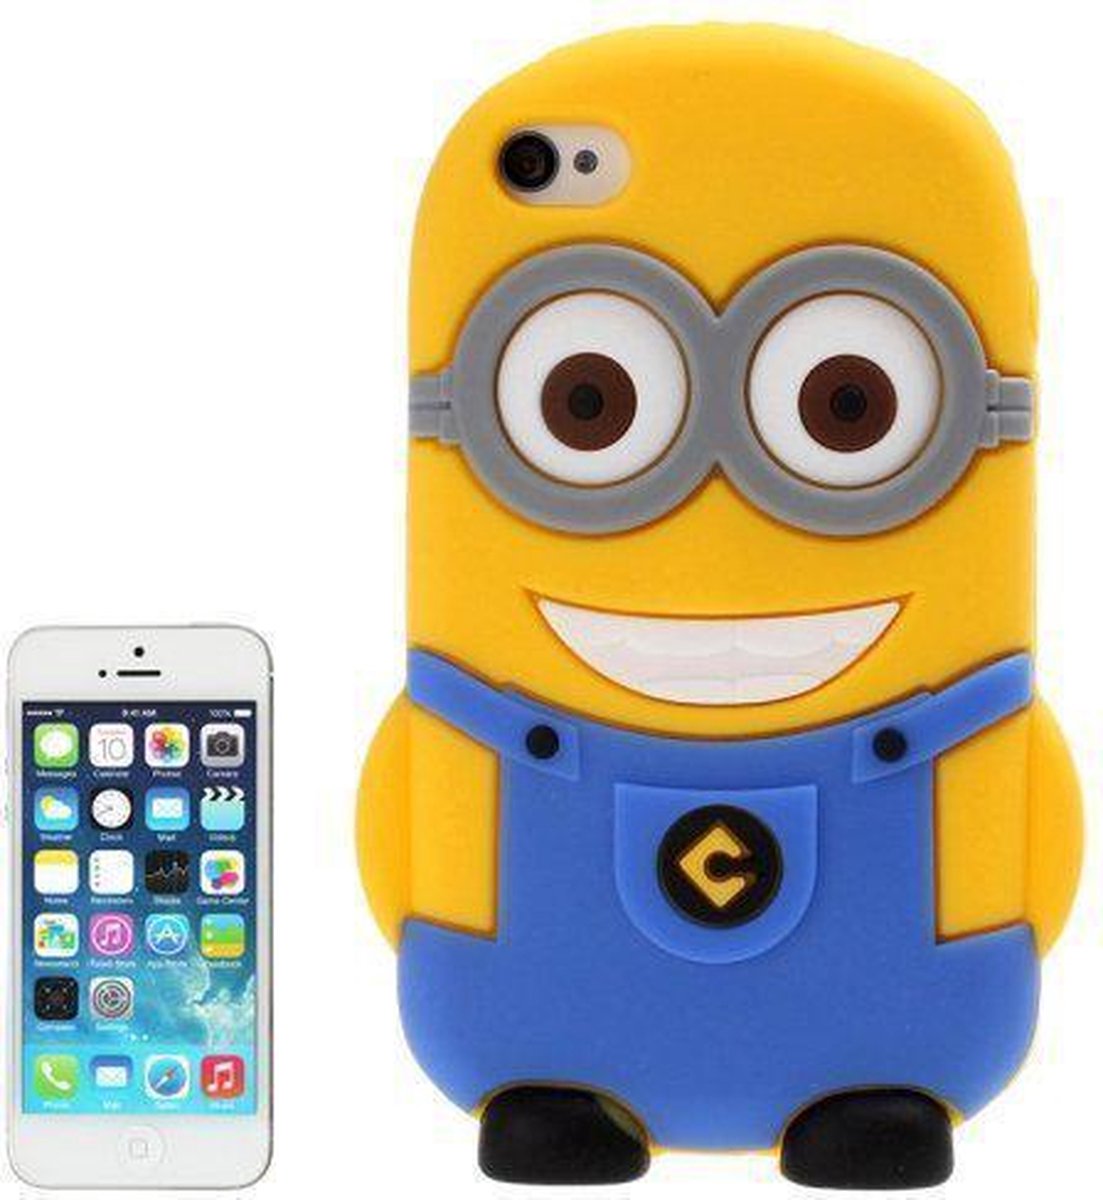 Versnel Boekwinkel Overtuiging iPhone 5, 5s Despicable Me Minion silicone Cover, hoesje, case blauw |  bol.com